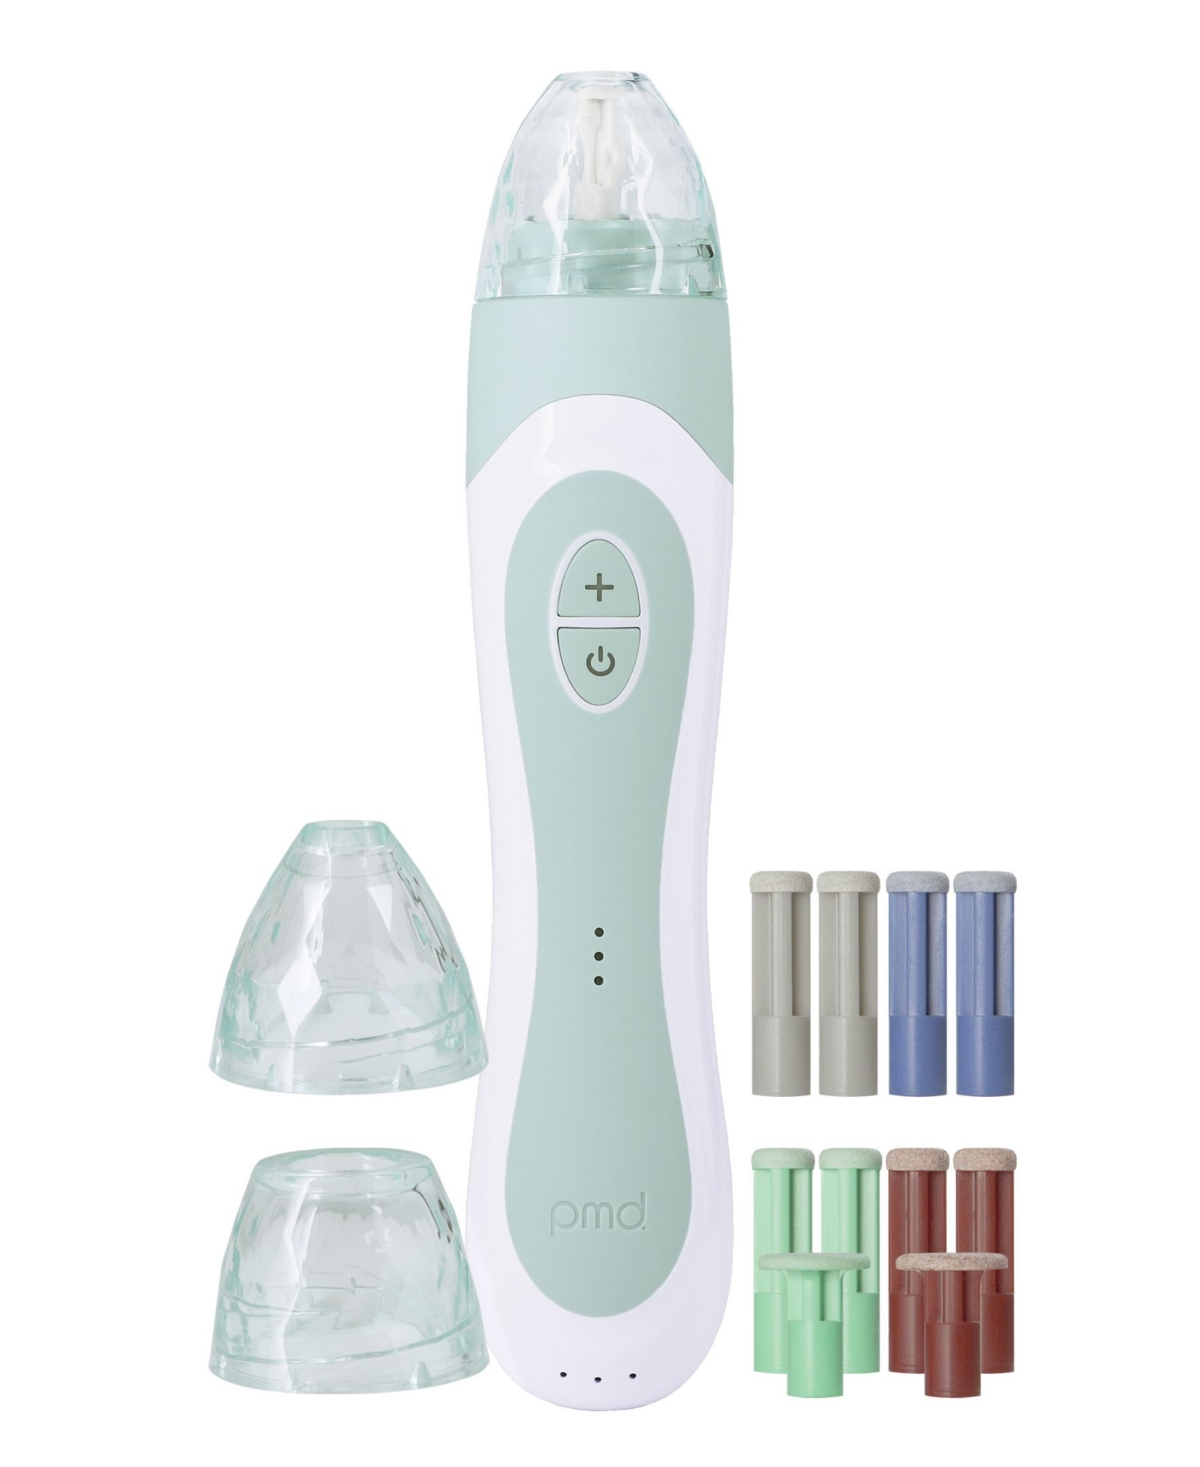 Pmd Personal Microderm Elite Pro In Baby Blue